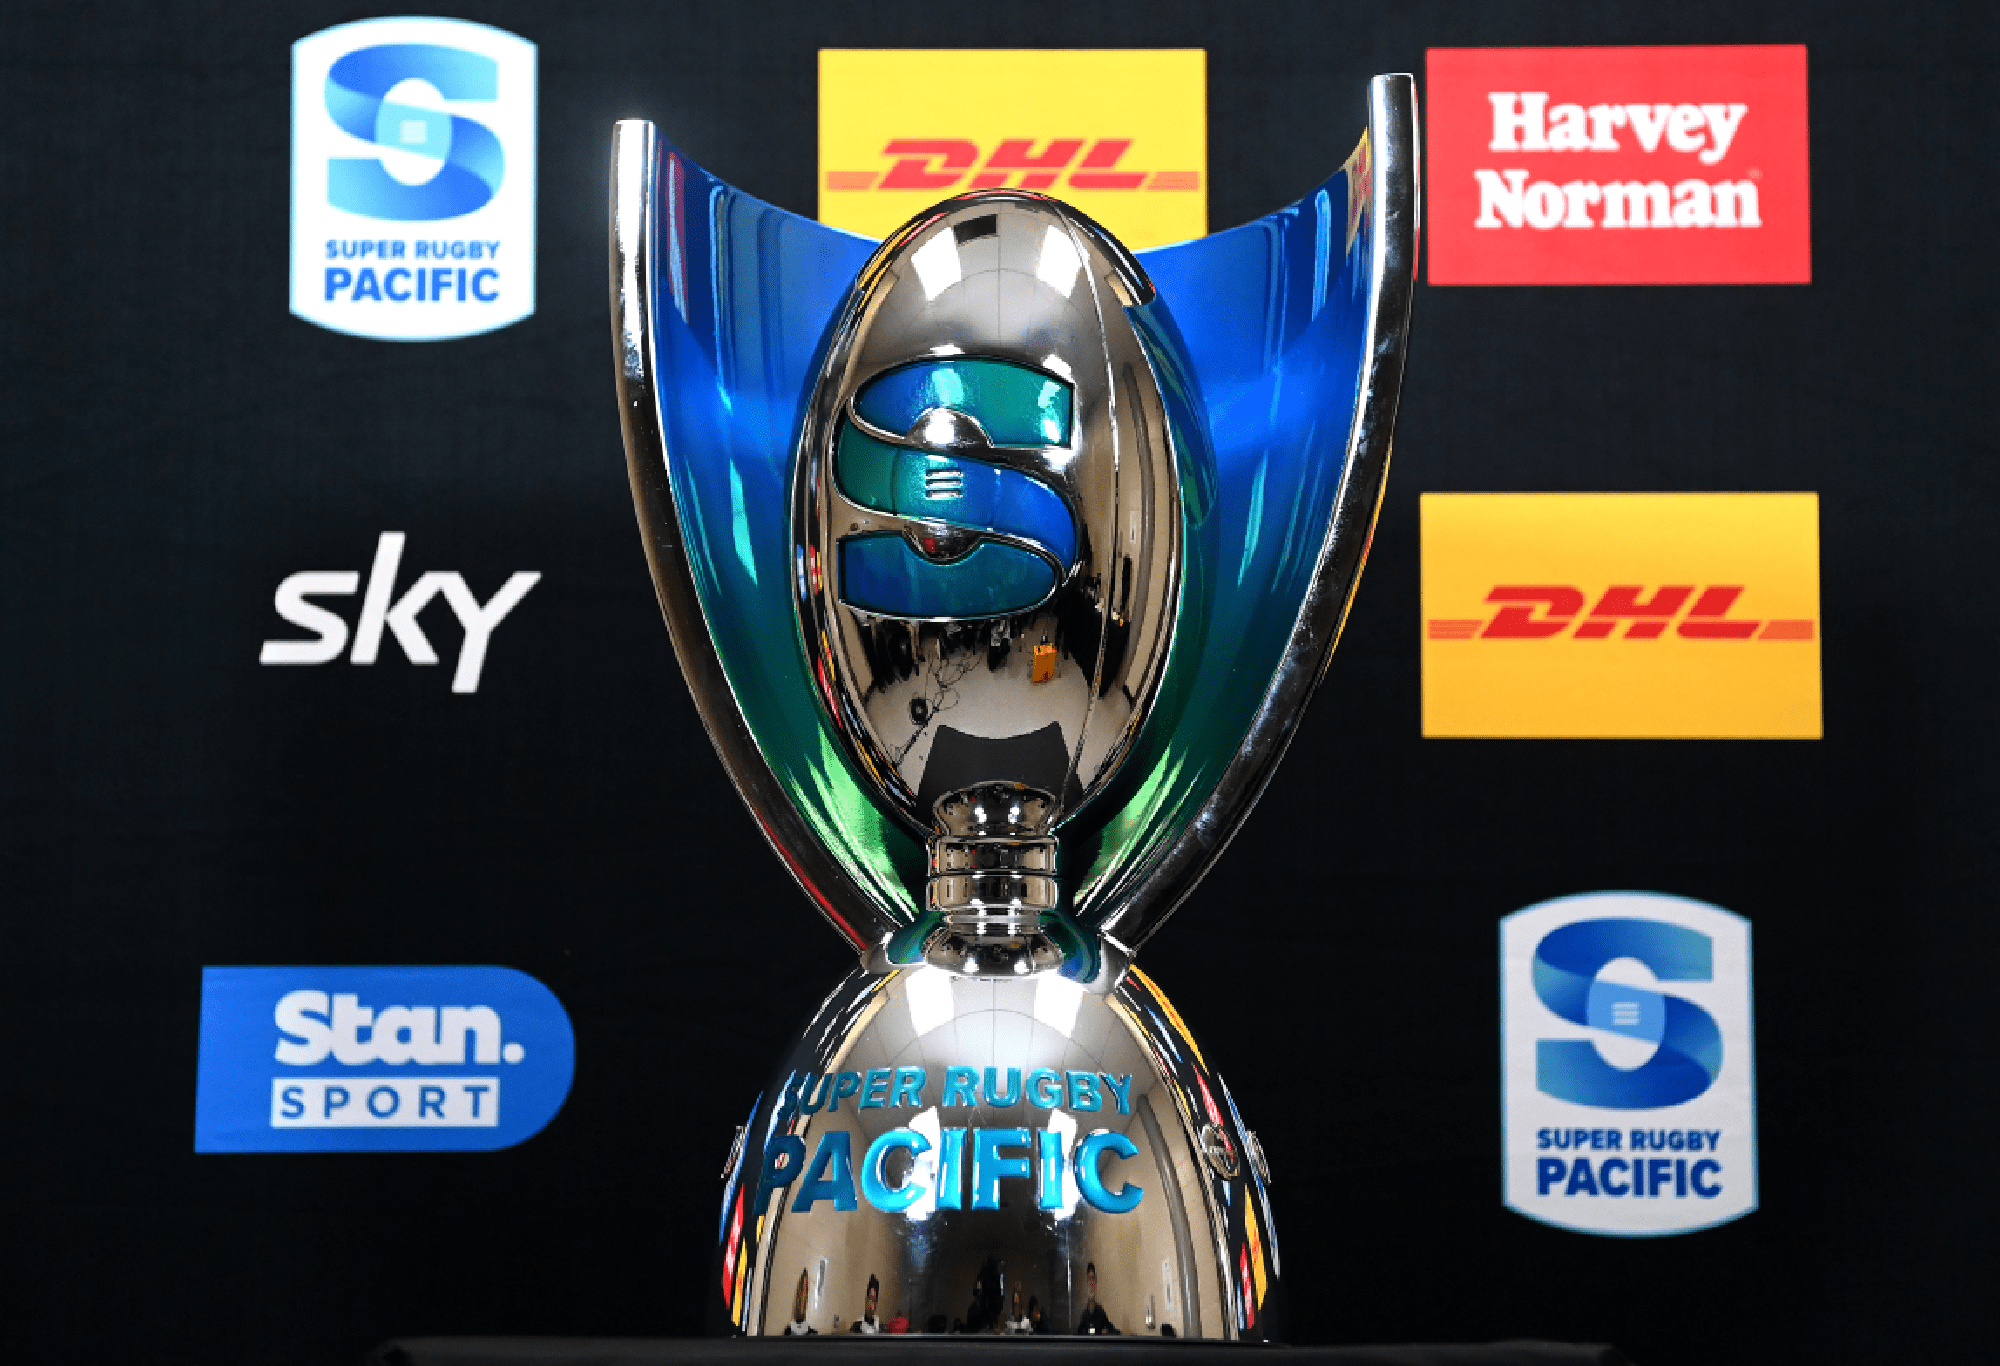 A view of the Super Rugby Pacific trophy is seen ahead of the Super Rugby Pacific Final match between Chiefs and Crusaders at FMG Stadium Waikato, on June 24, 2023, in Hamilton, New Zealand. (Photo by Hannah Peters/Getty Images)